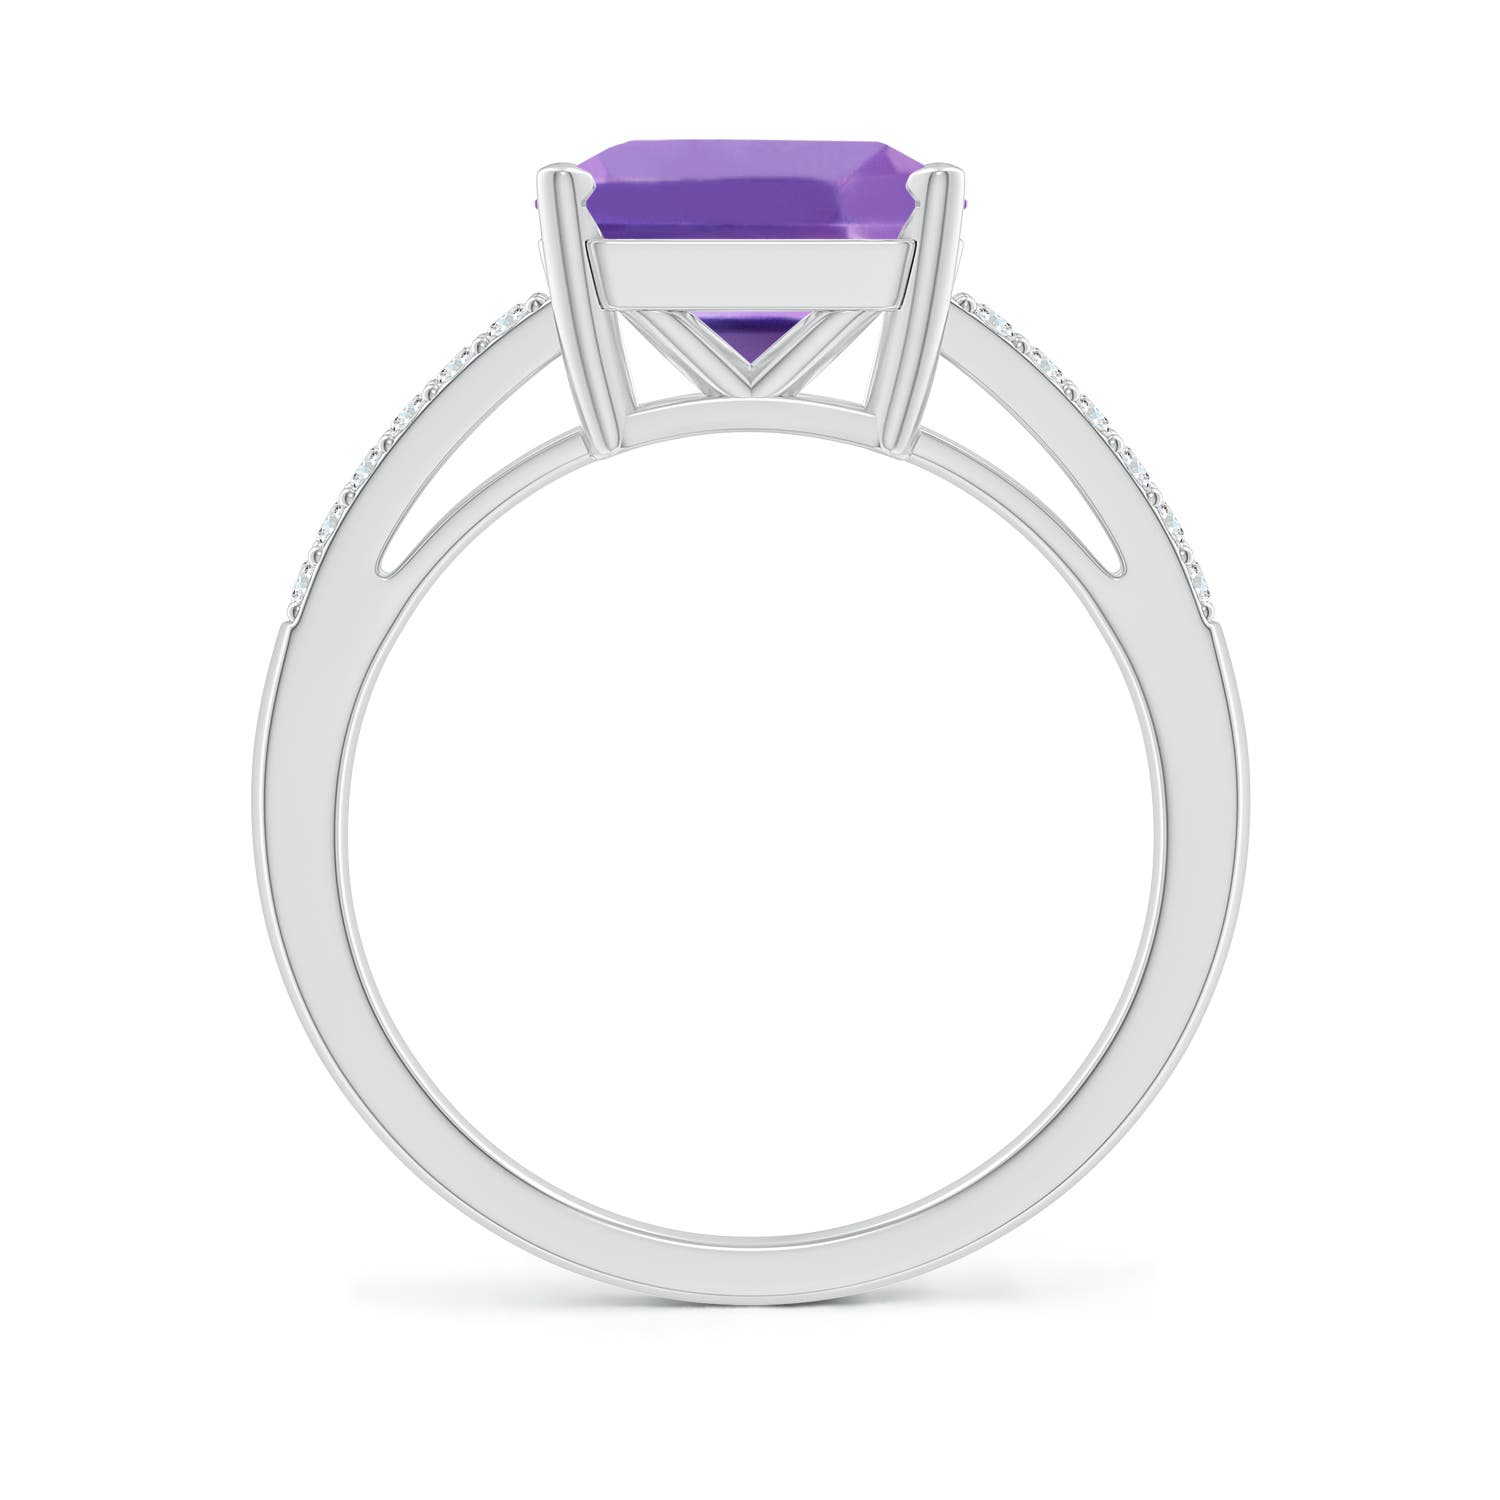 A - Amethyst / 3.04 CT / 14 KT White Gold